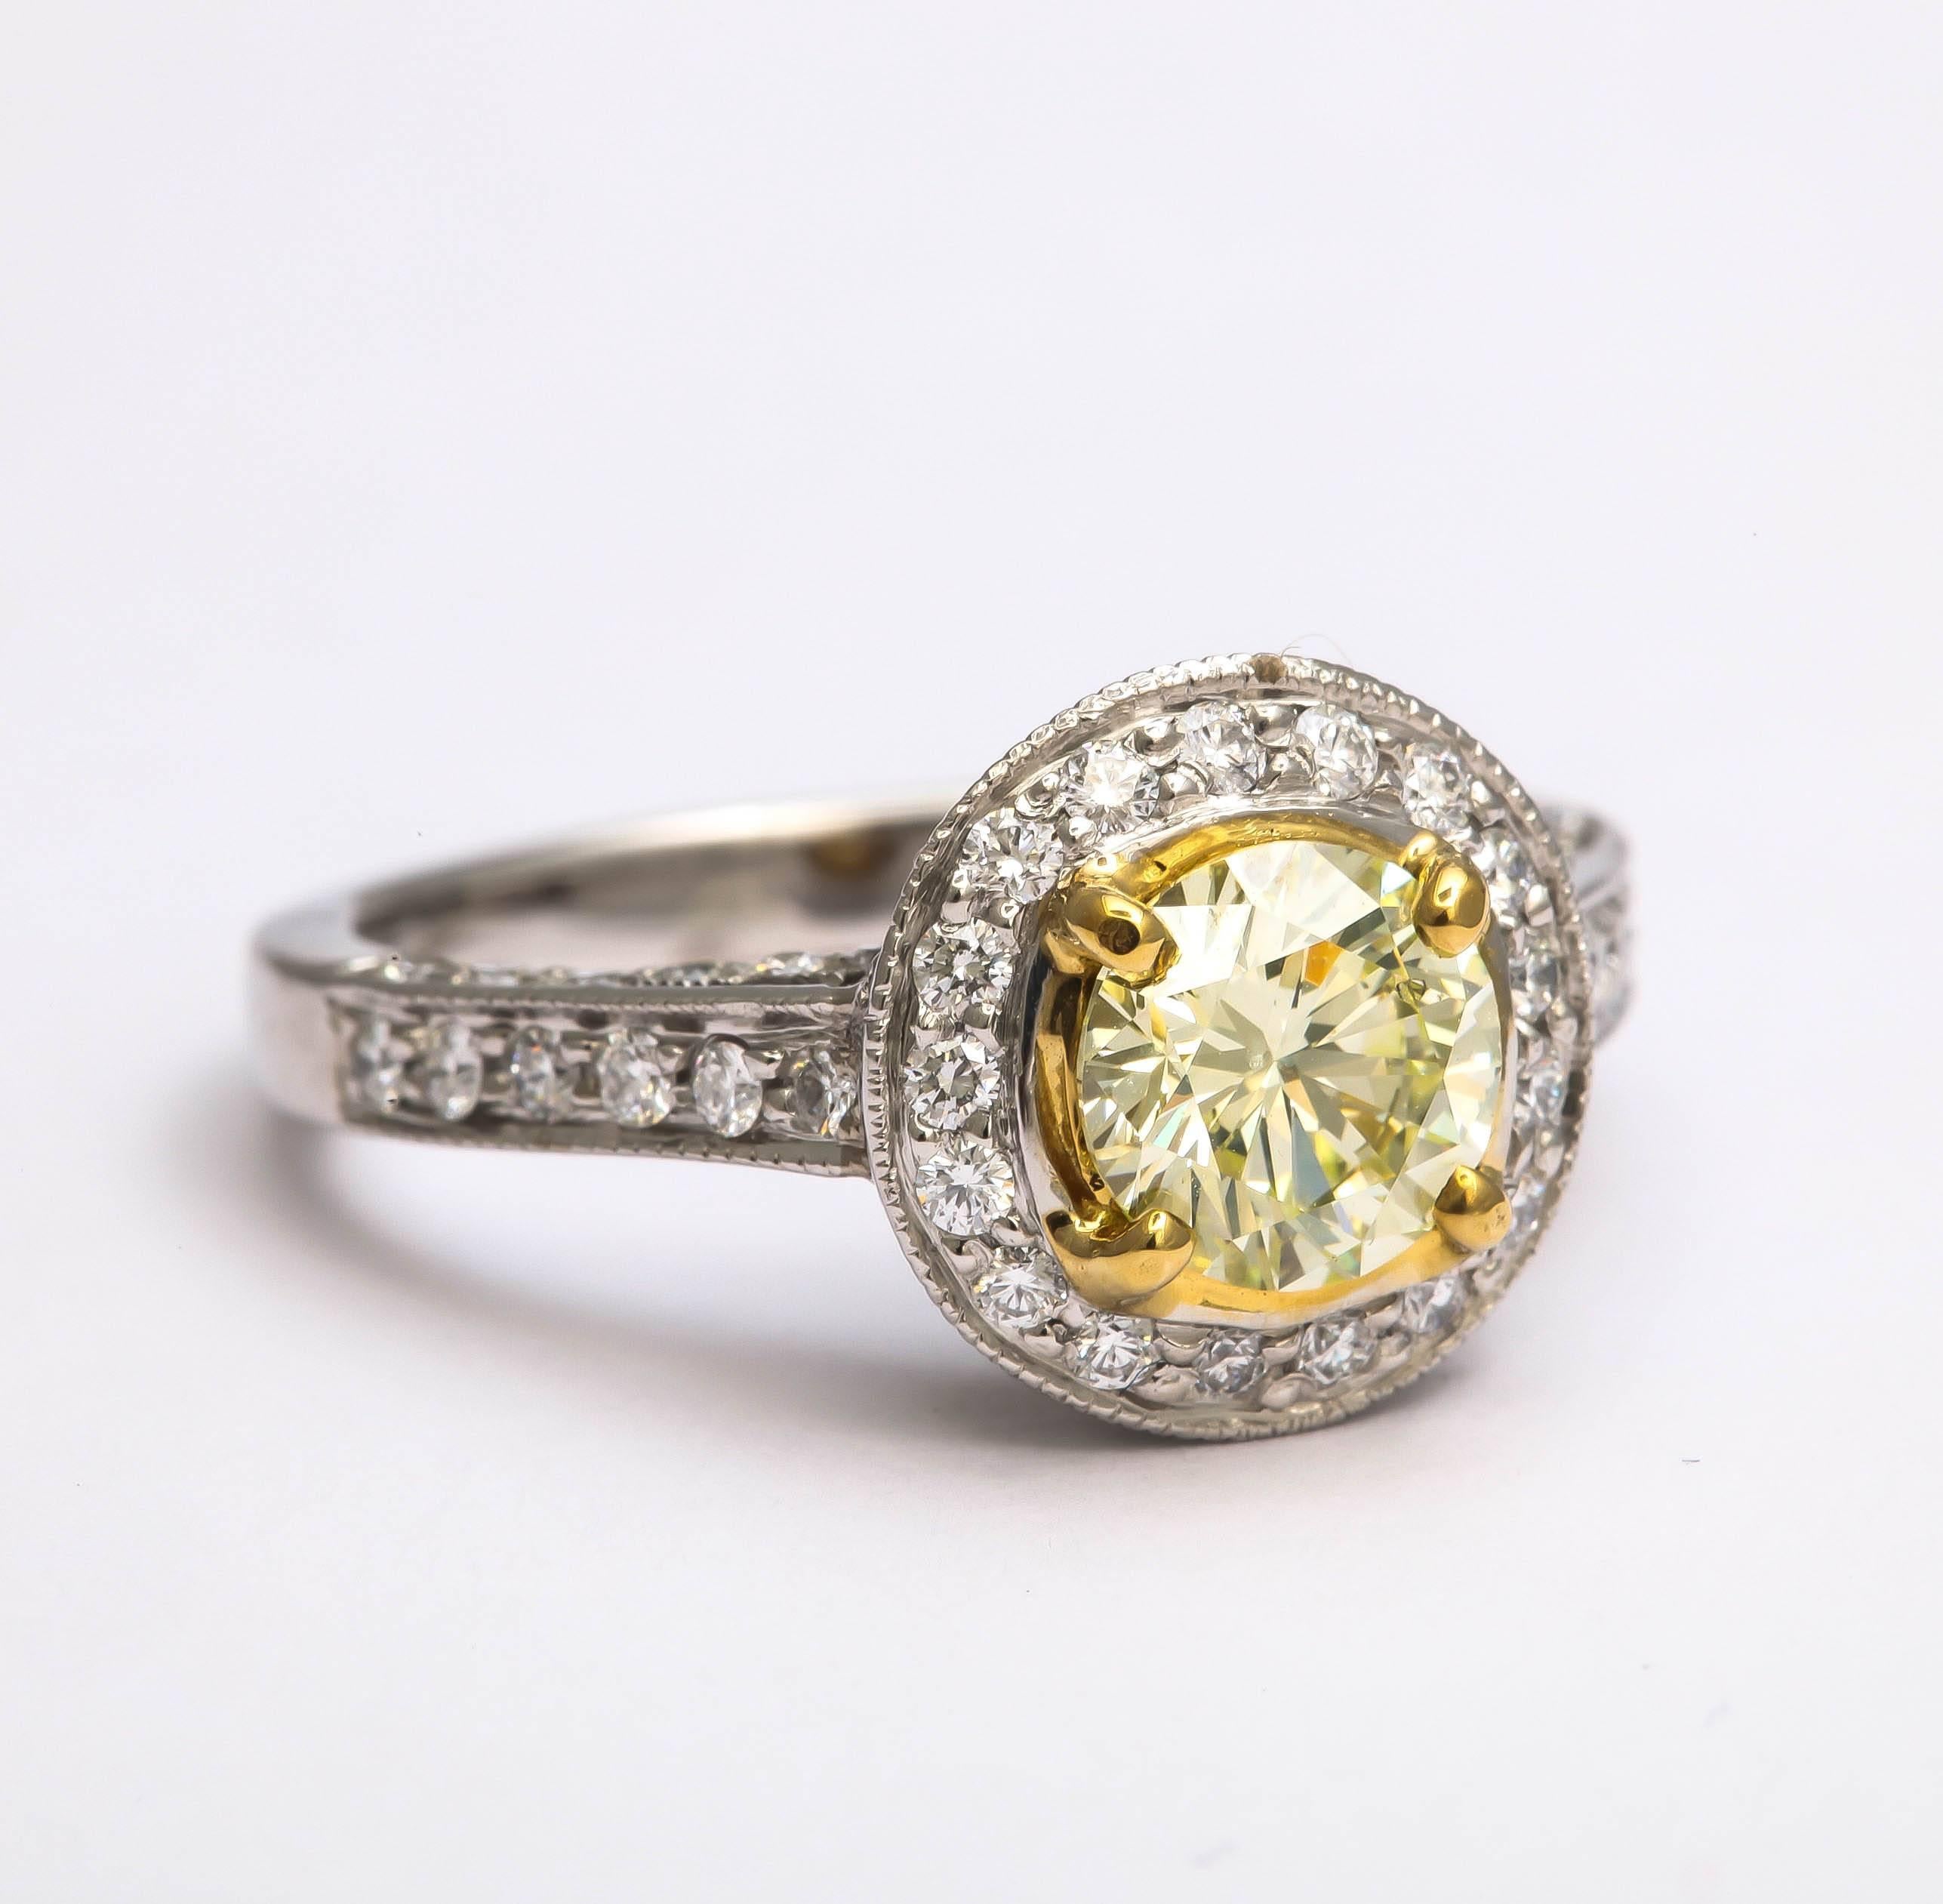 This lovely green yellow diamond weighs 1.05 cts. It is a natural color, SI 1 clarity and will be provided with a GIA certificate. The ring is made in platinum and 18 kt yellow and the center stone is surrounded in micro pave diamonds of F color, VS